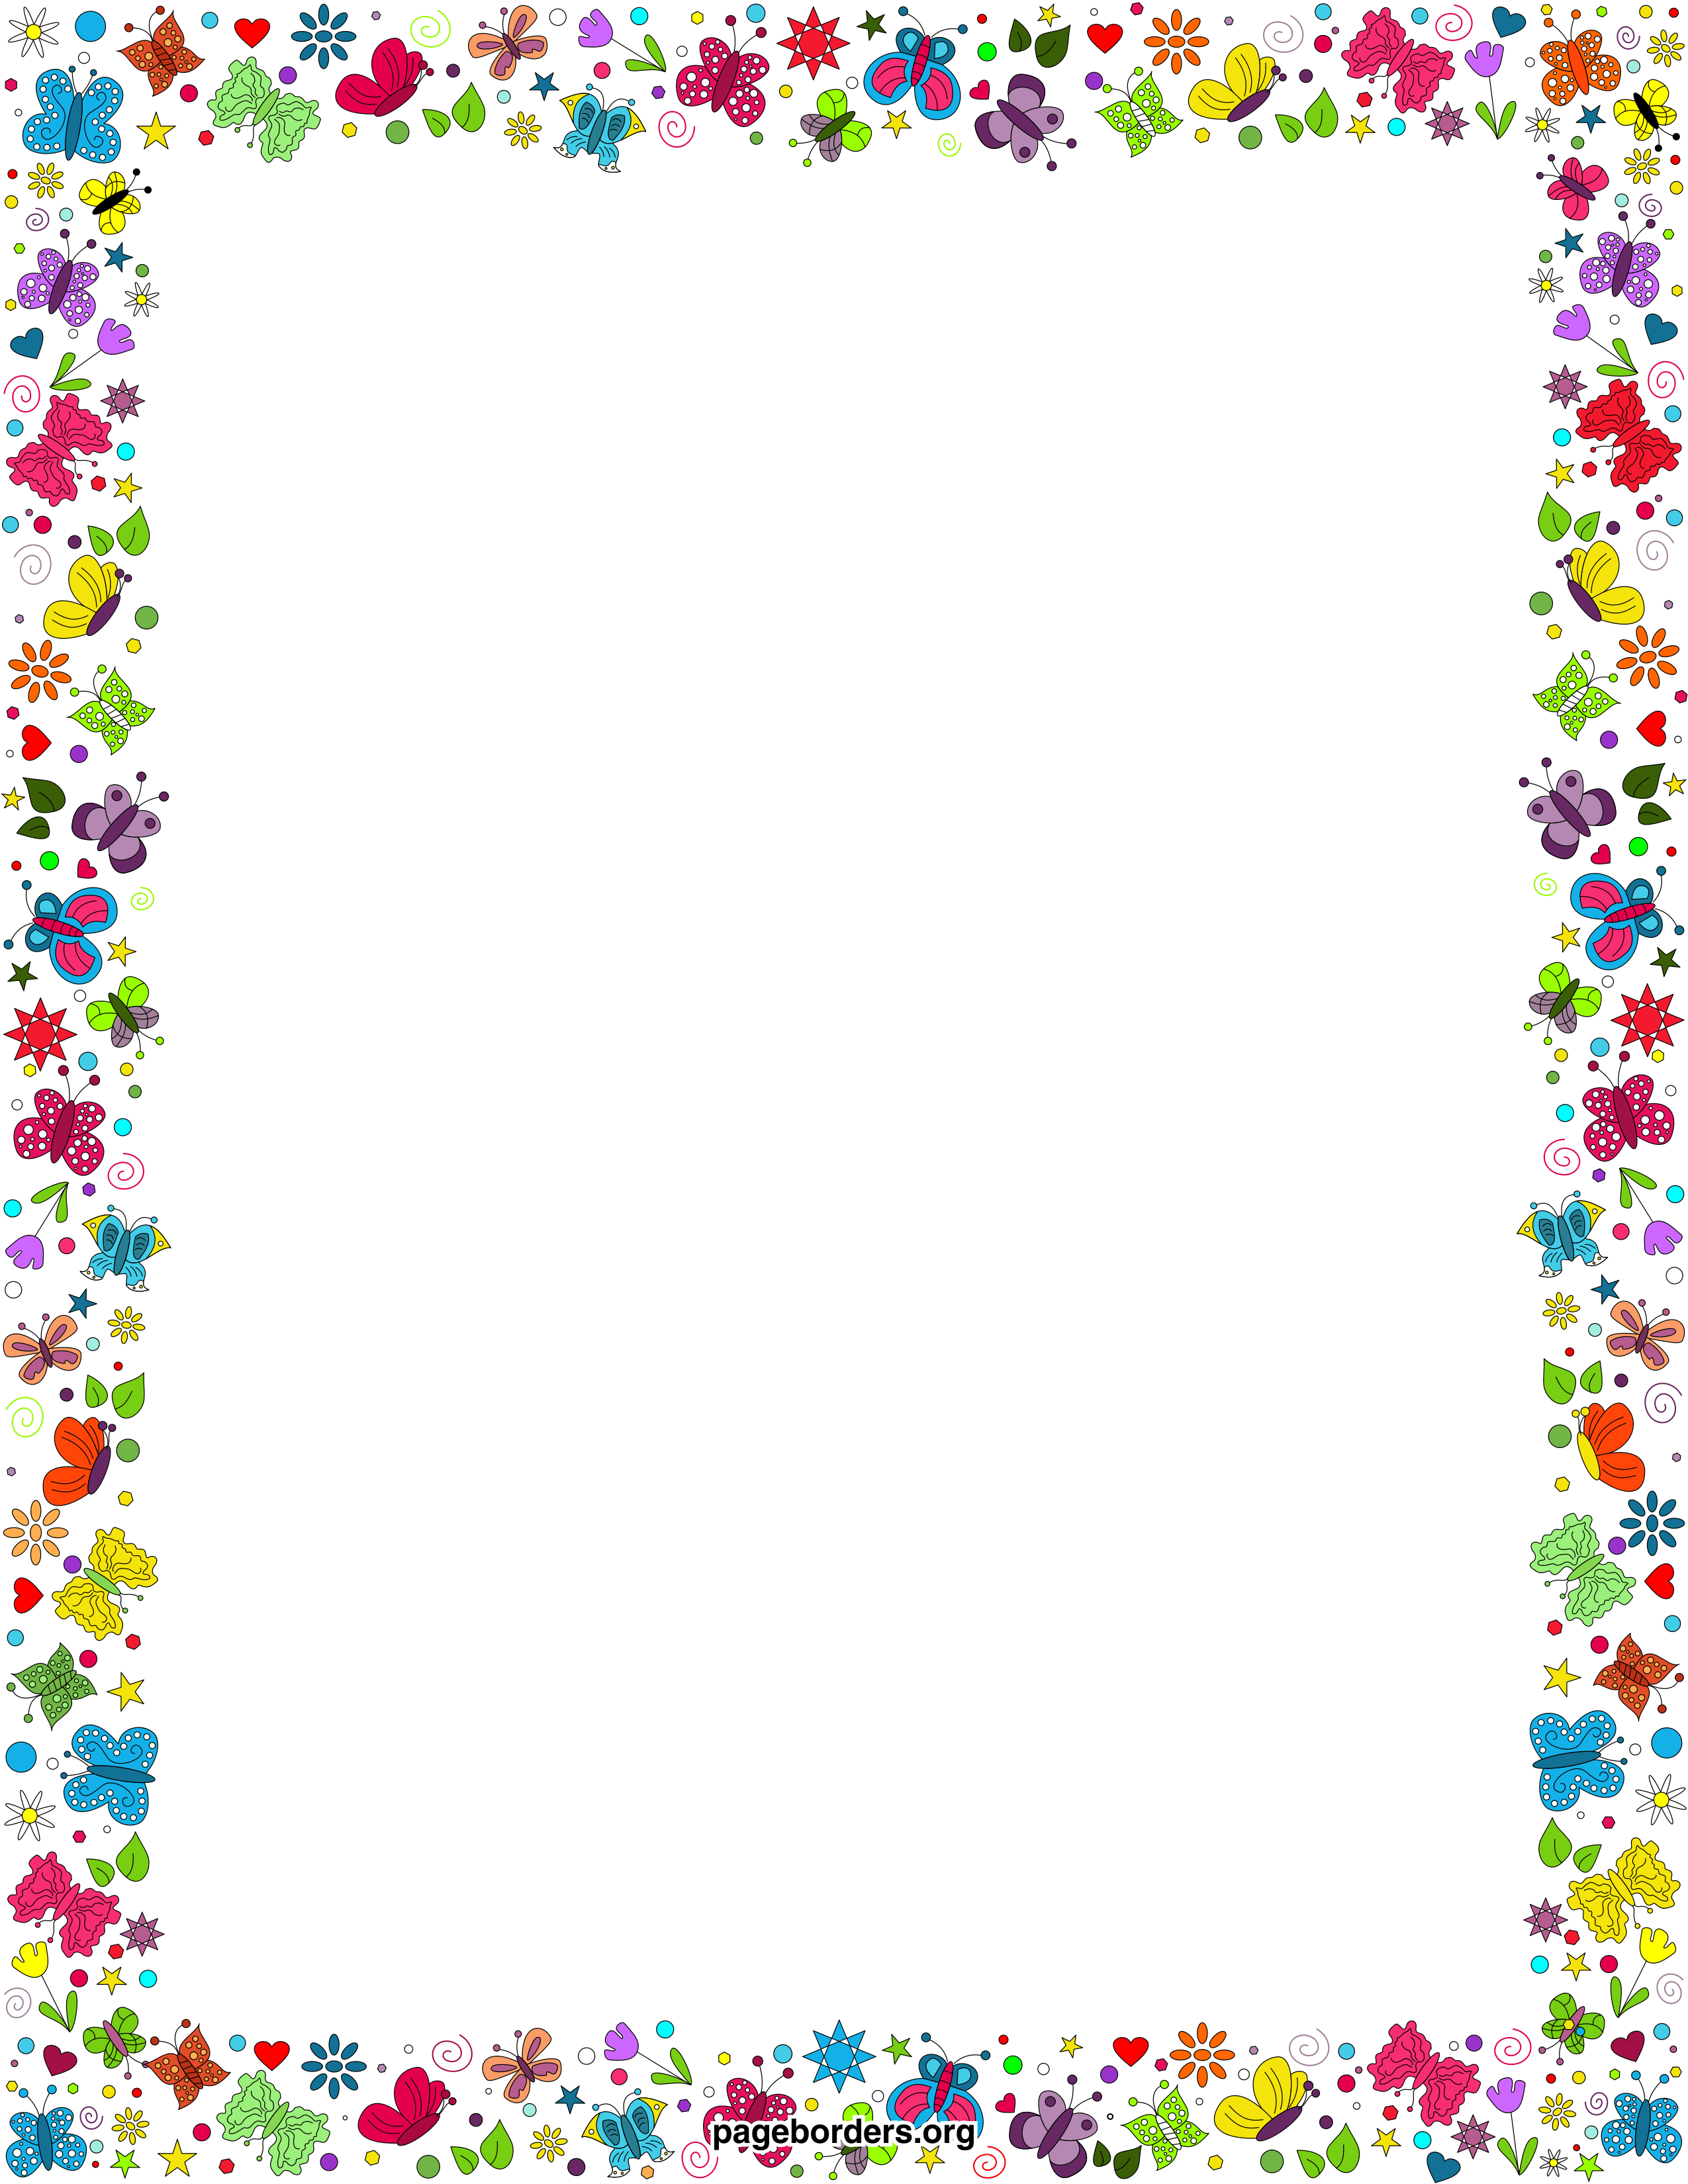 free online clipart page borders - photo #26